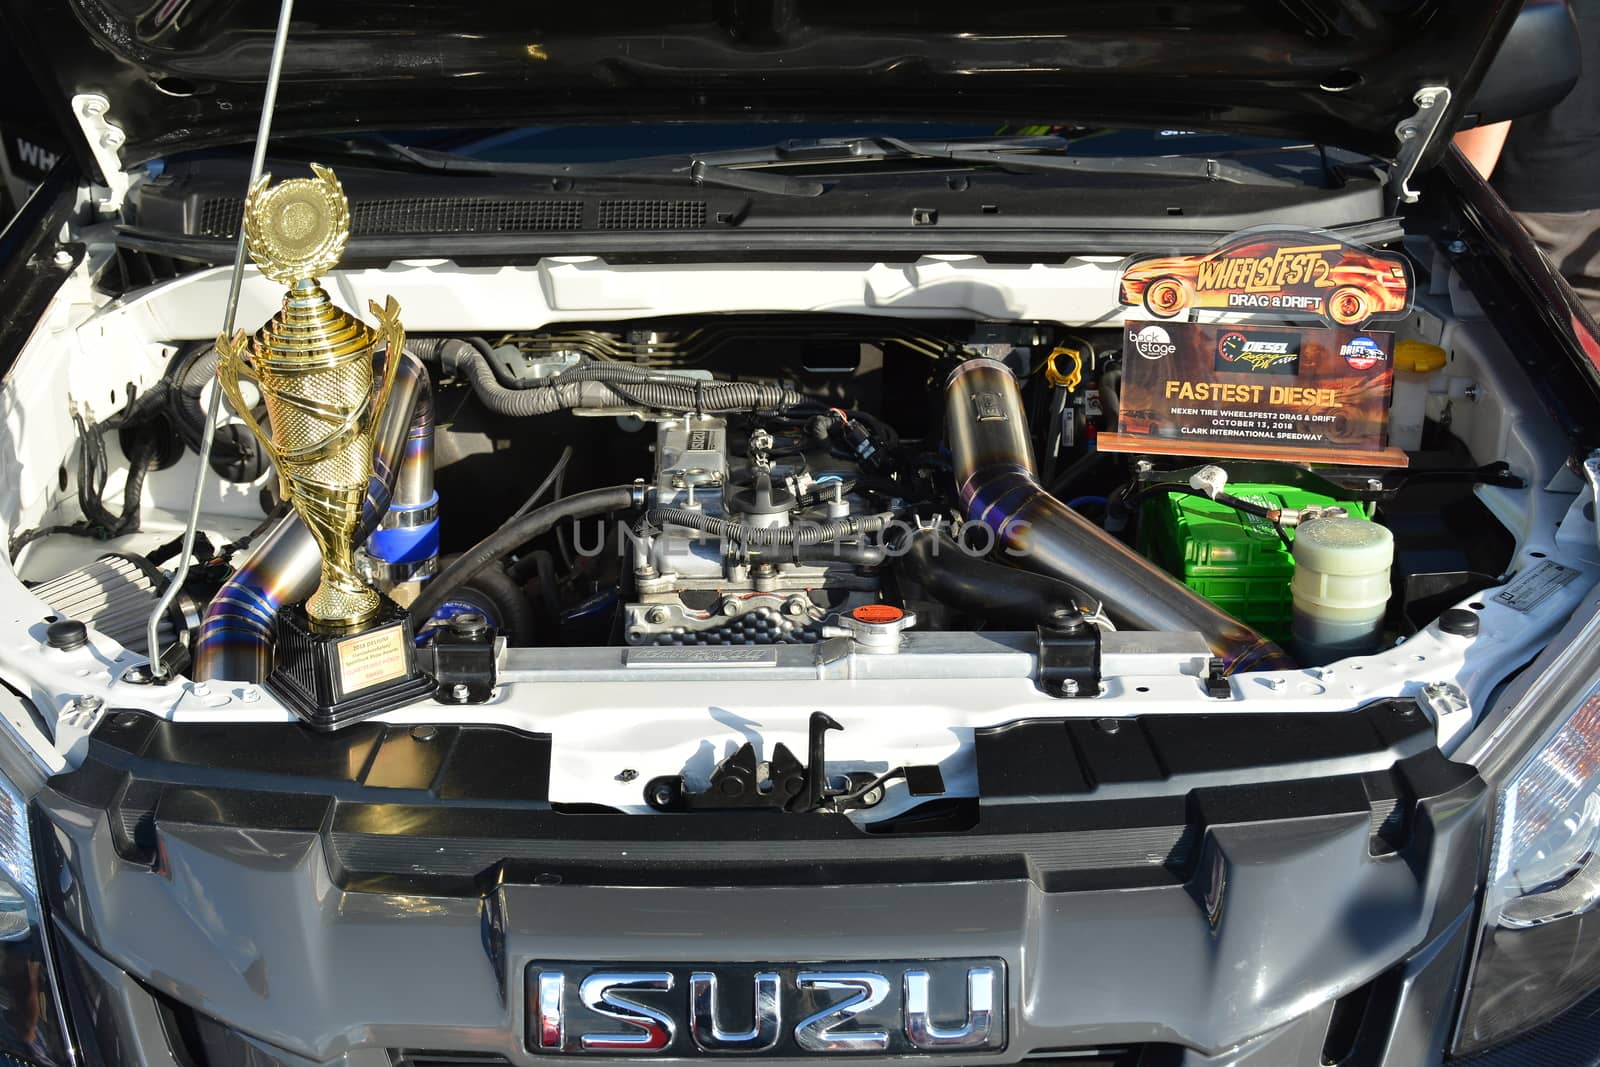 Isuzu dmax pick up motor engine at Bumper to Bumper car show in  by imwaltersy